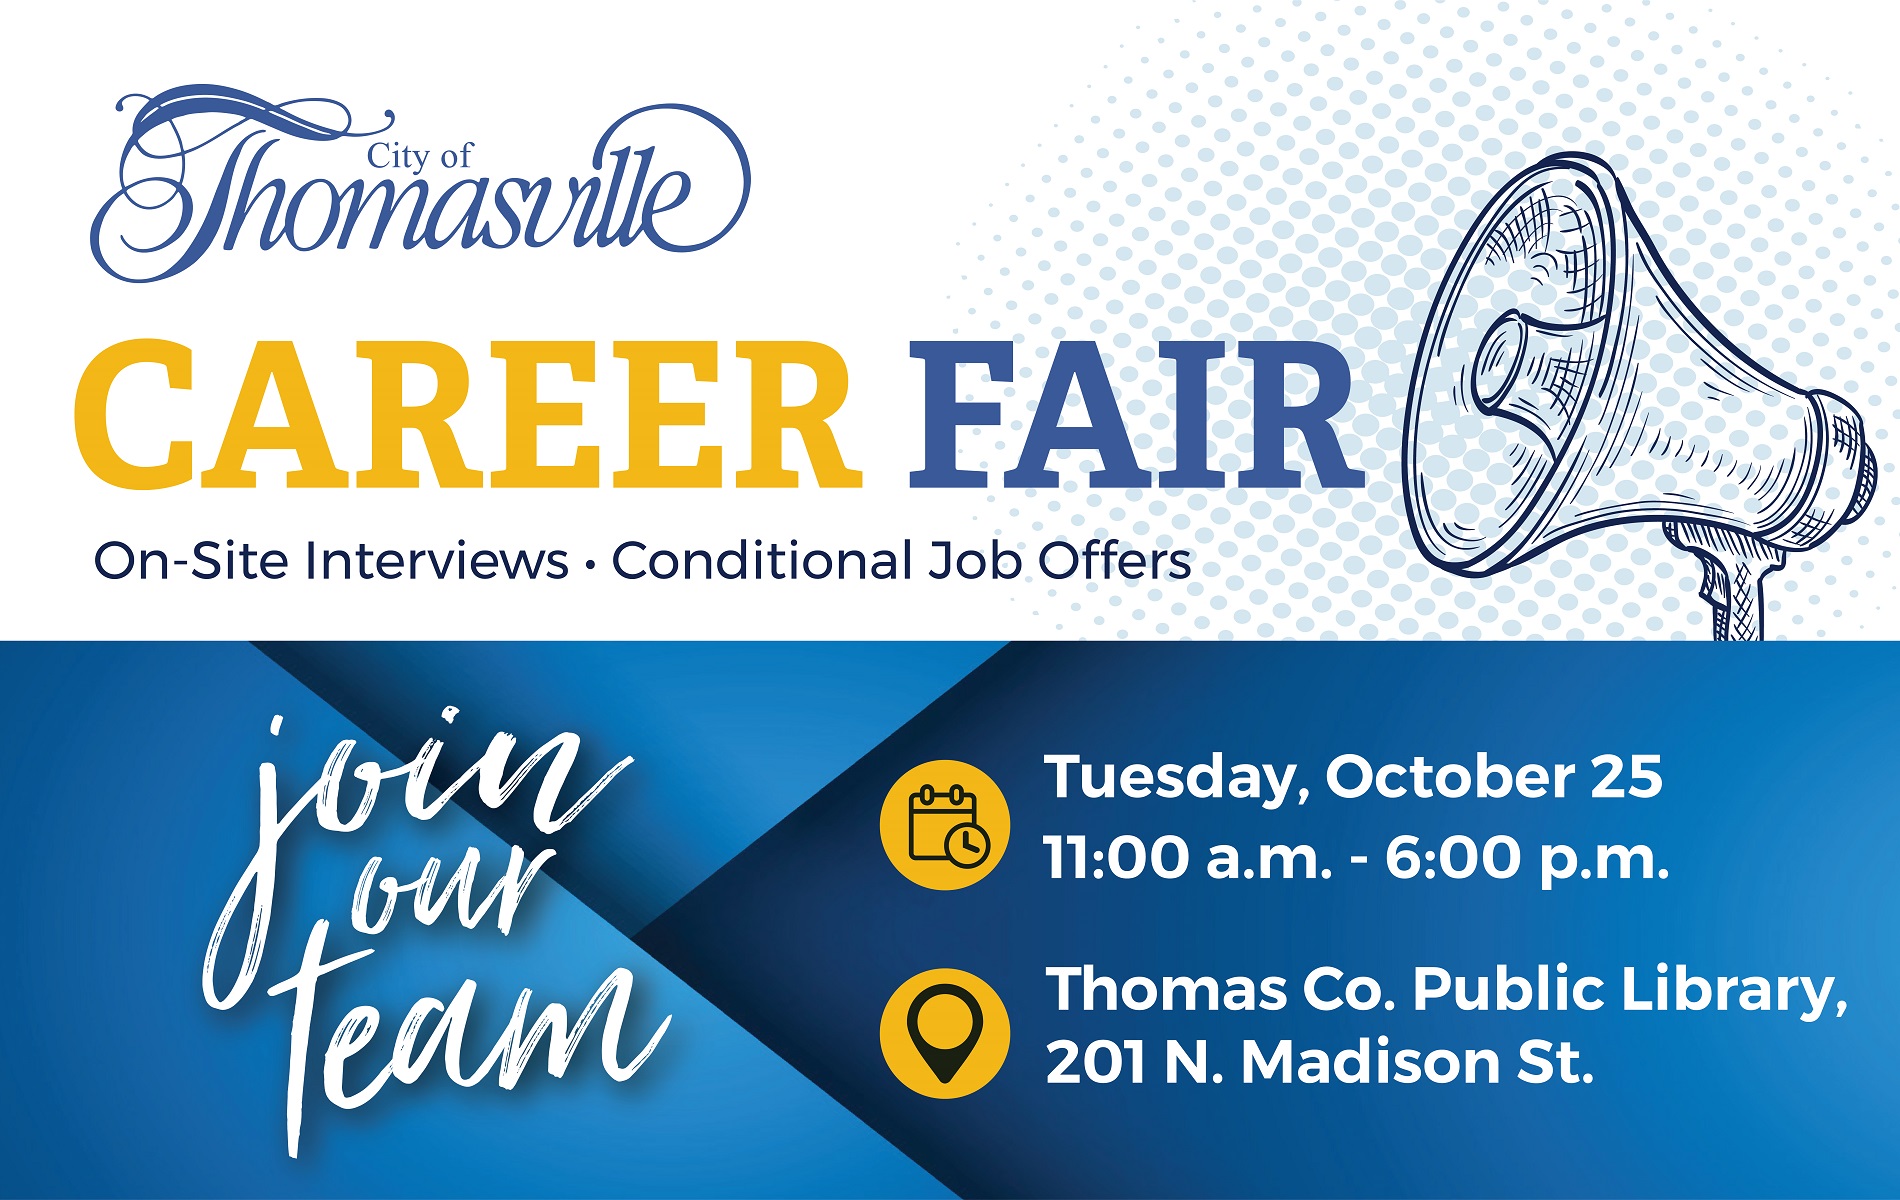 Photo for CITY OF THOMASVILLE HOSTS CAREER FAIR